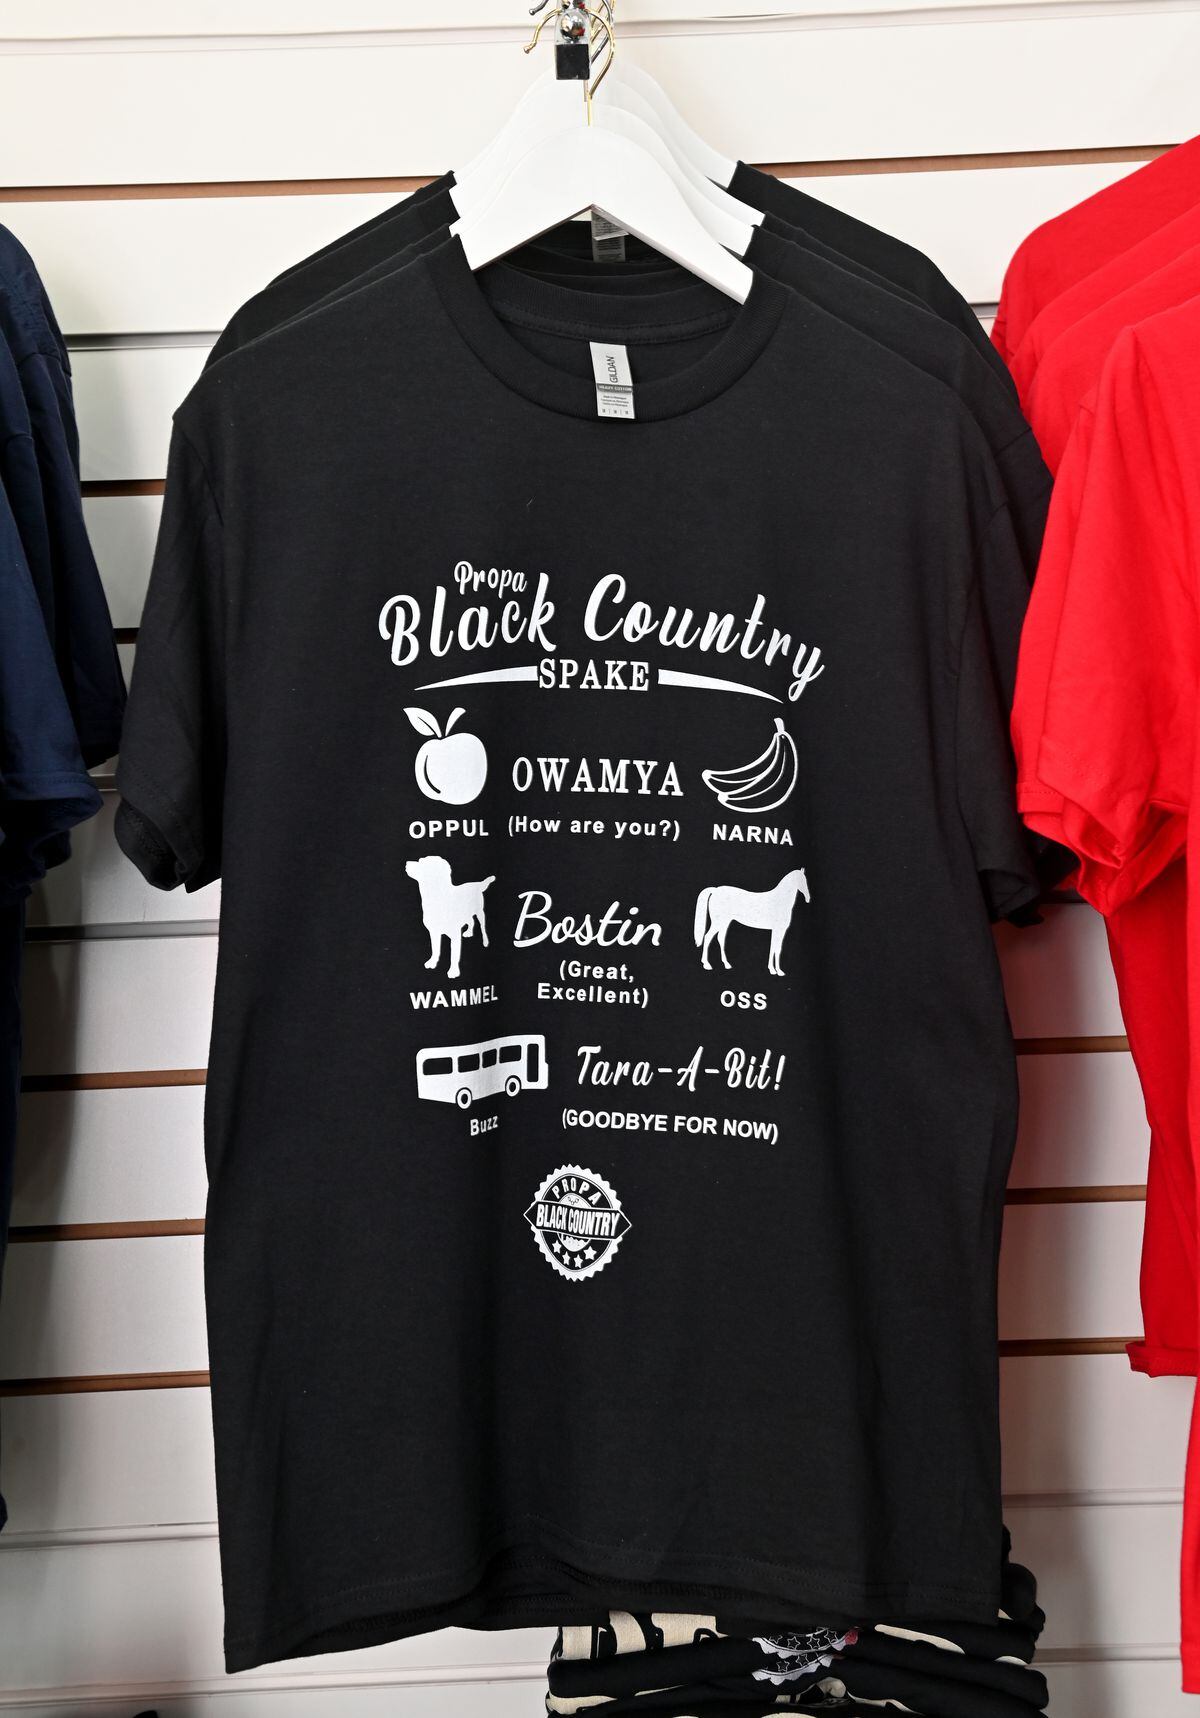 New Black Country T-shirts which have now appeared in the Black Country Hub at Merry Hill Shopping Centre 